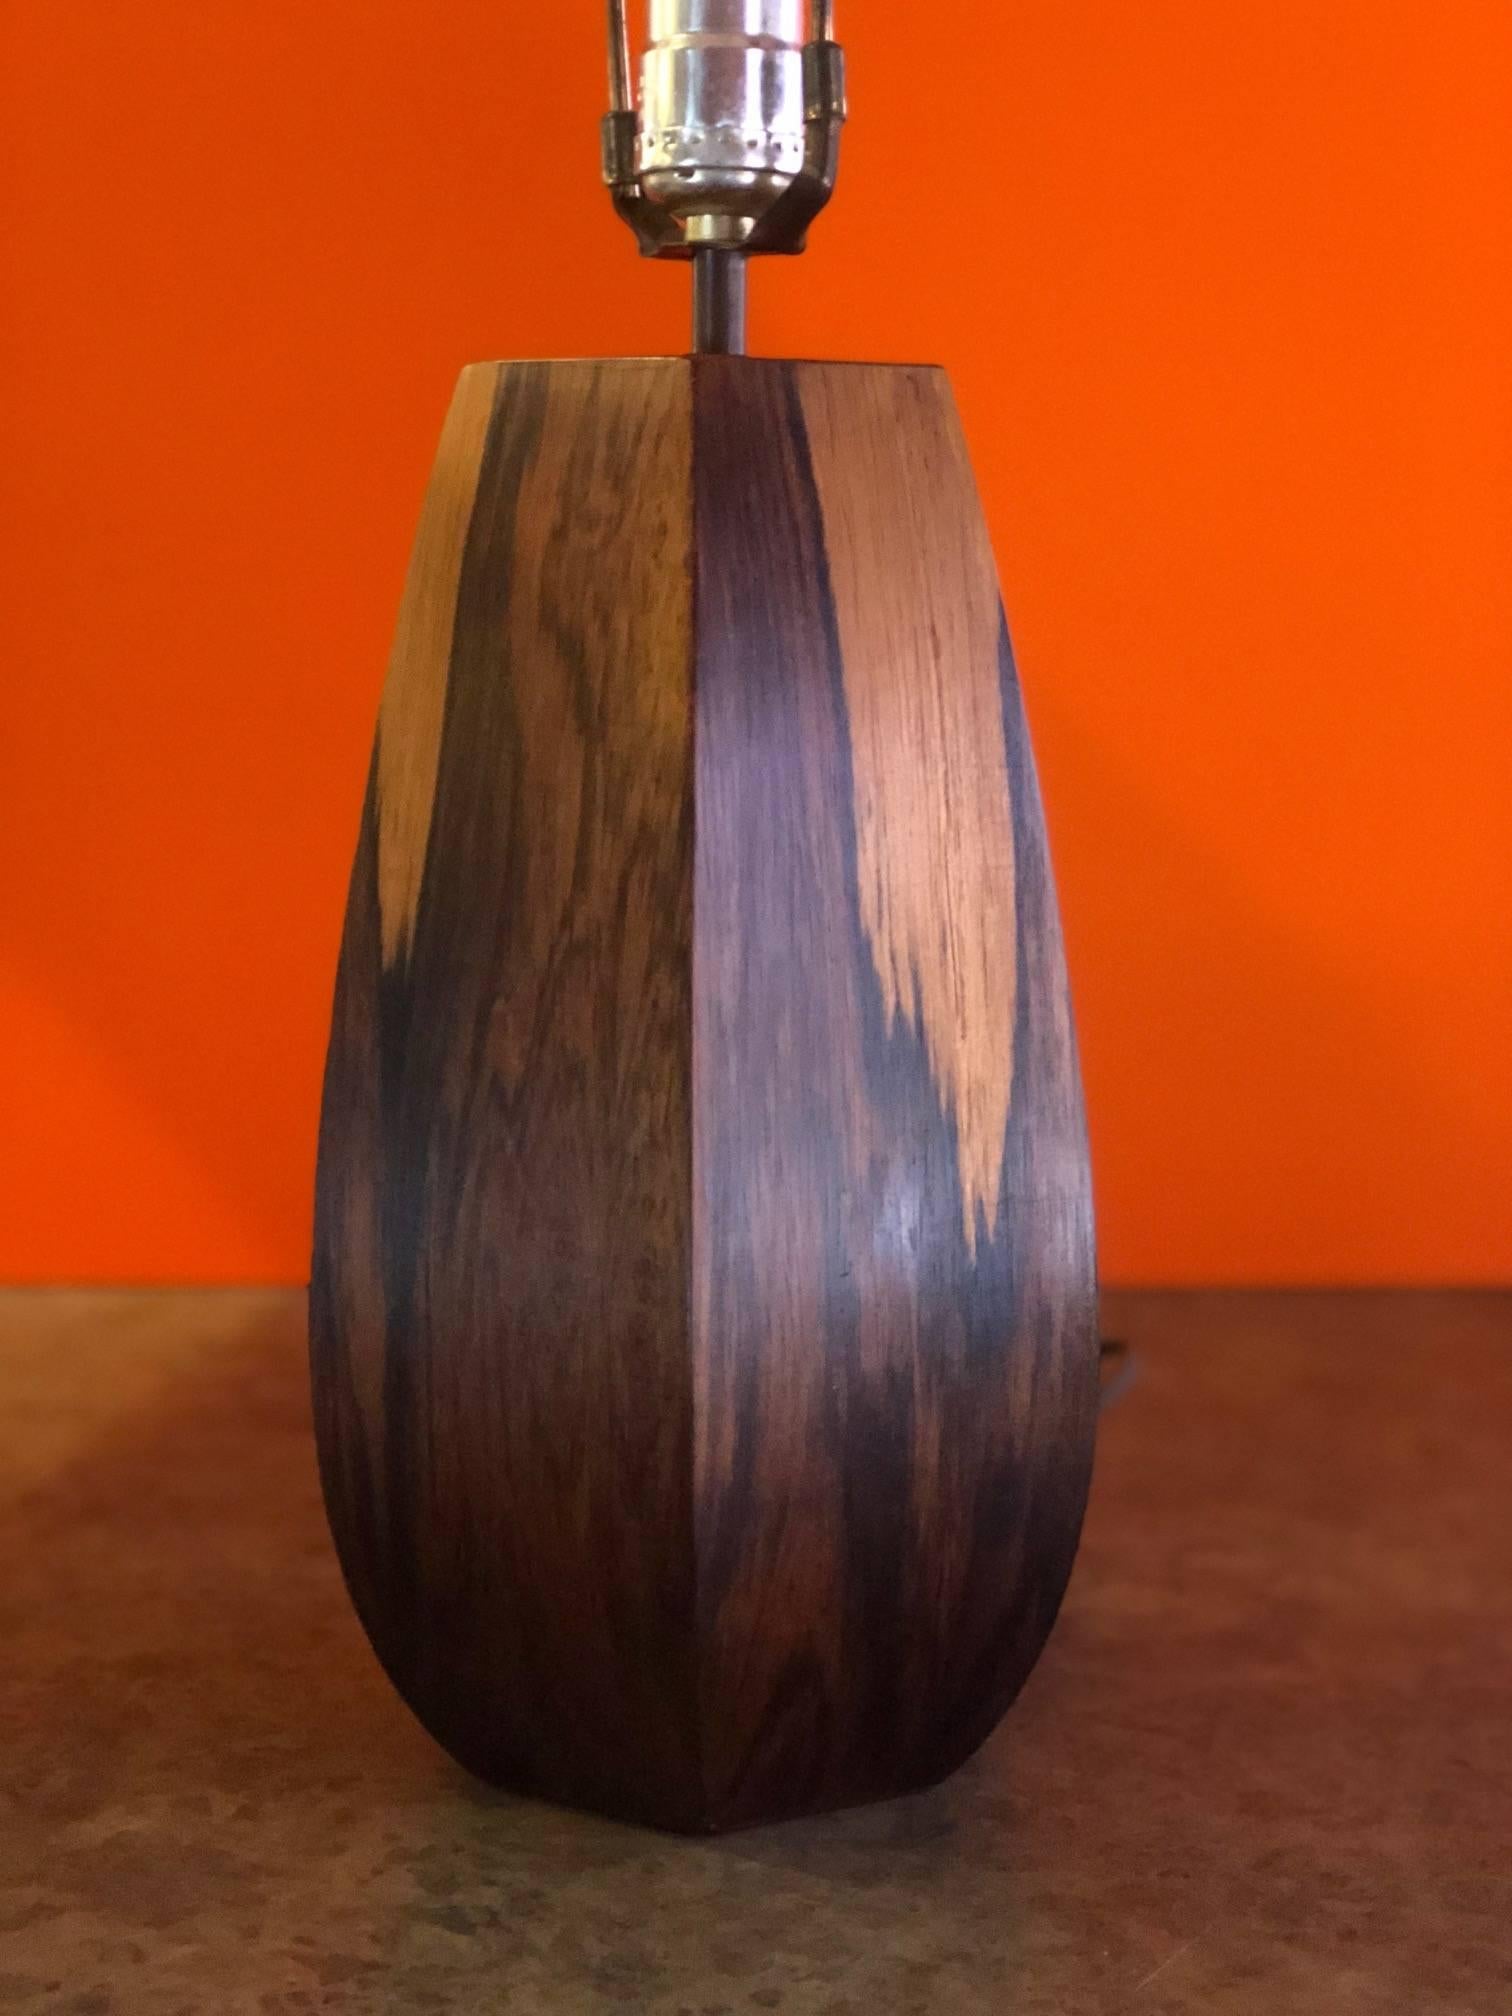 Midcentury Danish Modern Rosewood Hexagonal Table Lamp In Excellent Condition For Sale In San Diego, CA